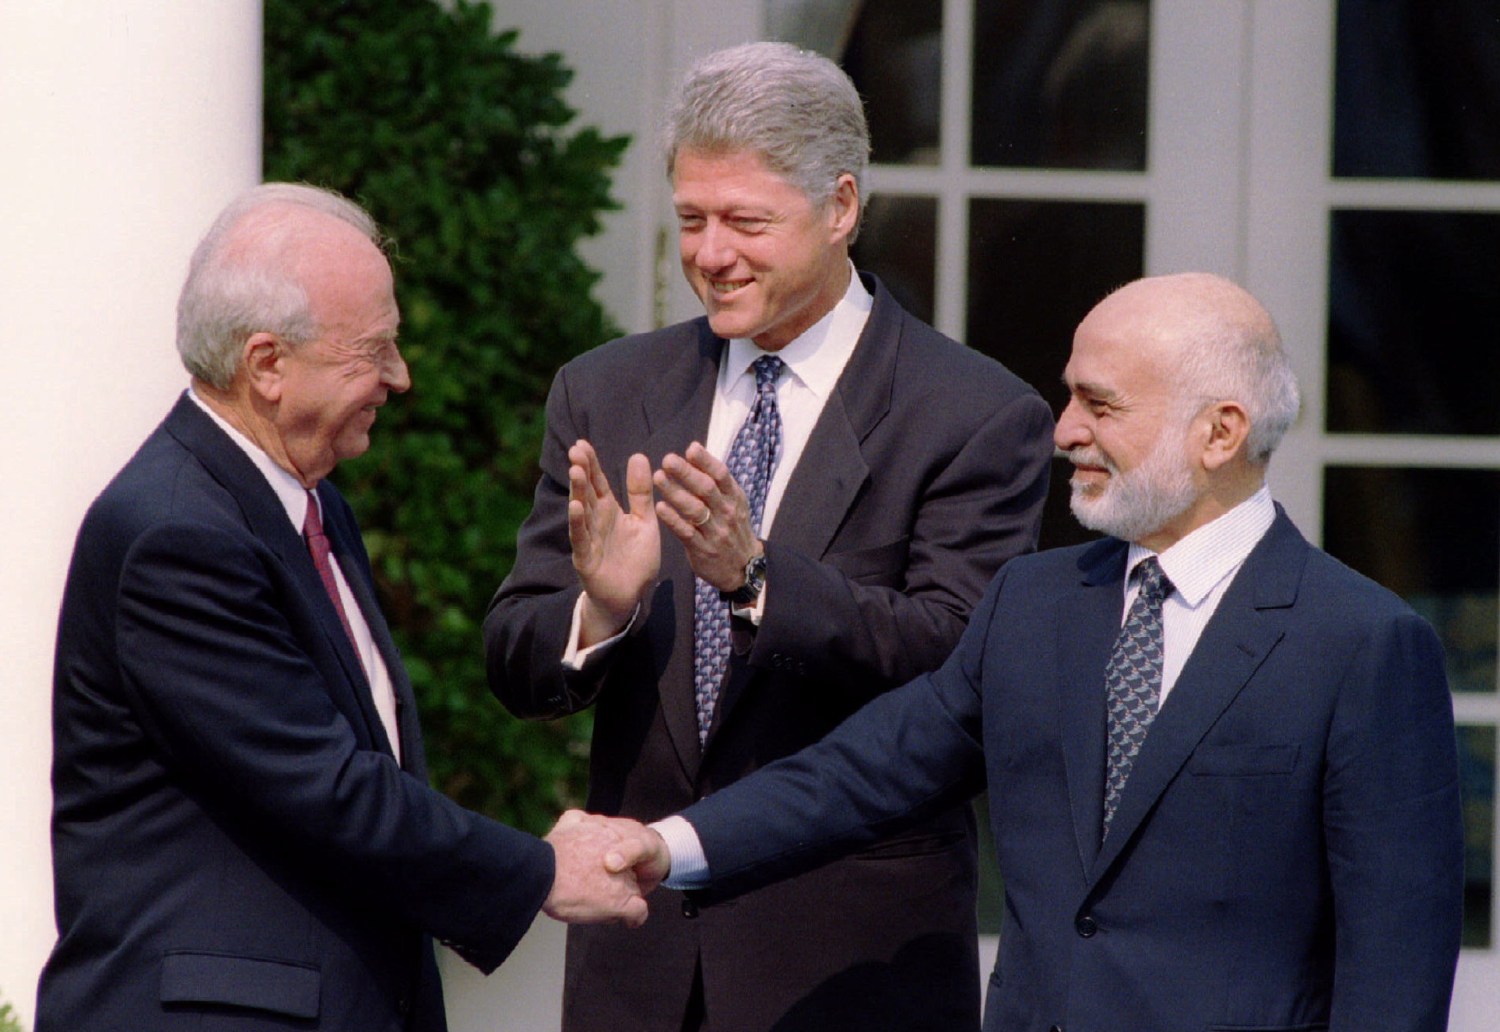 Israeli Prime Minister Yitzhak Rabin (L) and Jordan's King Hussein (R) grasp hands enthusiastically at the start of a Rose Garden ceremony welcoming them to the White House as President Clinton applauds July 25, 1994 in Washington. The leaders of Israel and Jordan shook hands ending nearly a half-century of antagonism and signalling their intent to make a formal peace. SCANNED FROM NEGATIVE REUTERS/Gary C. Cameron  AVD/CMC - RP1DRICQYTAG